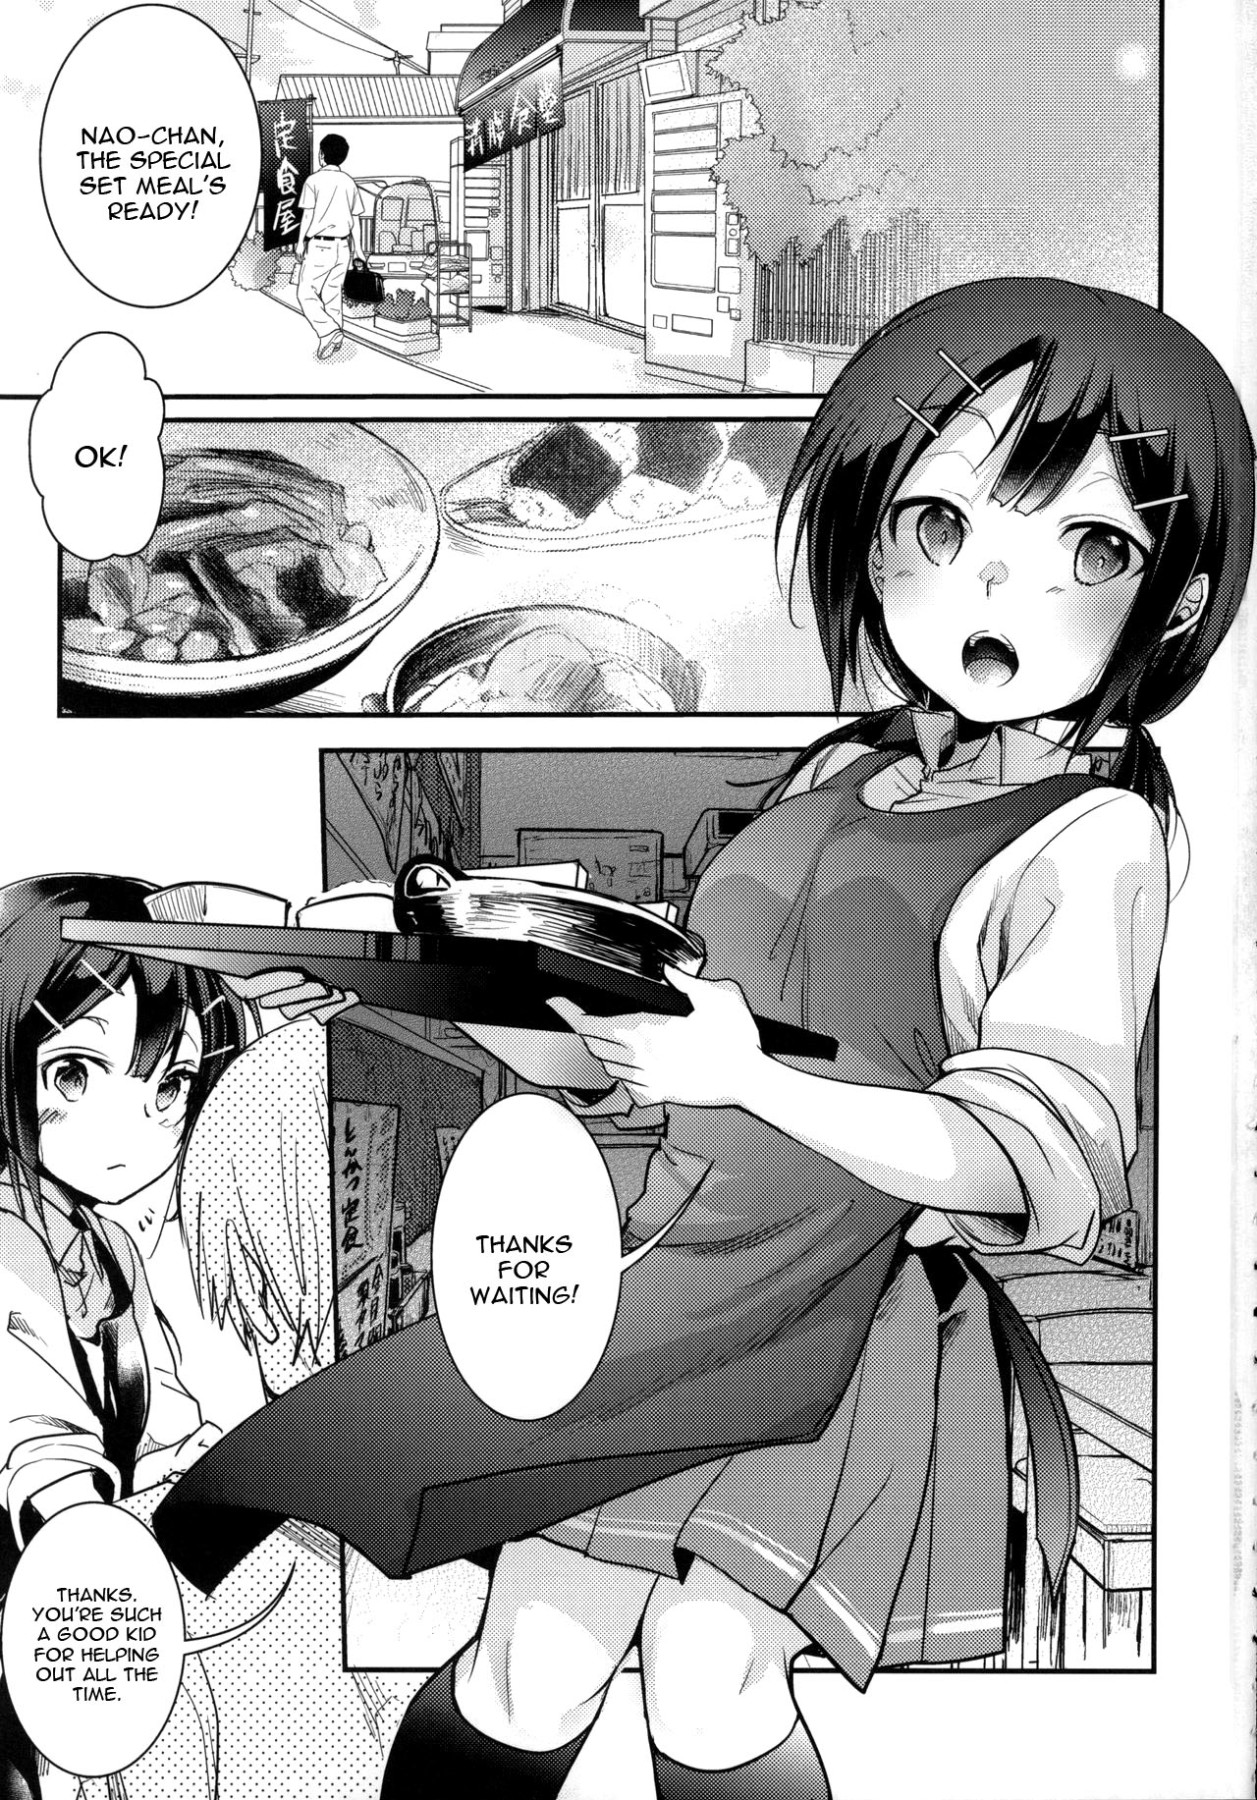 Hentai Manga Comic-A Story About Fucking a Delicious Looking Woman Right In Front Of Work - Restaurant Edition-Read-2